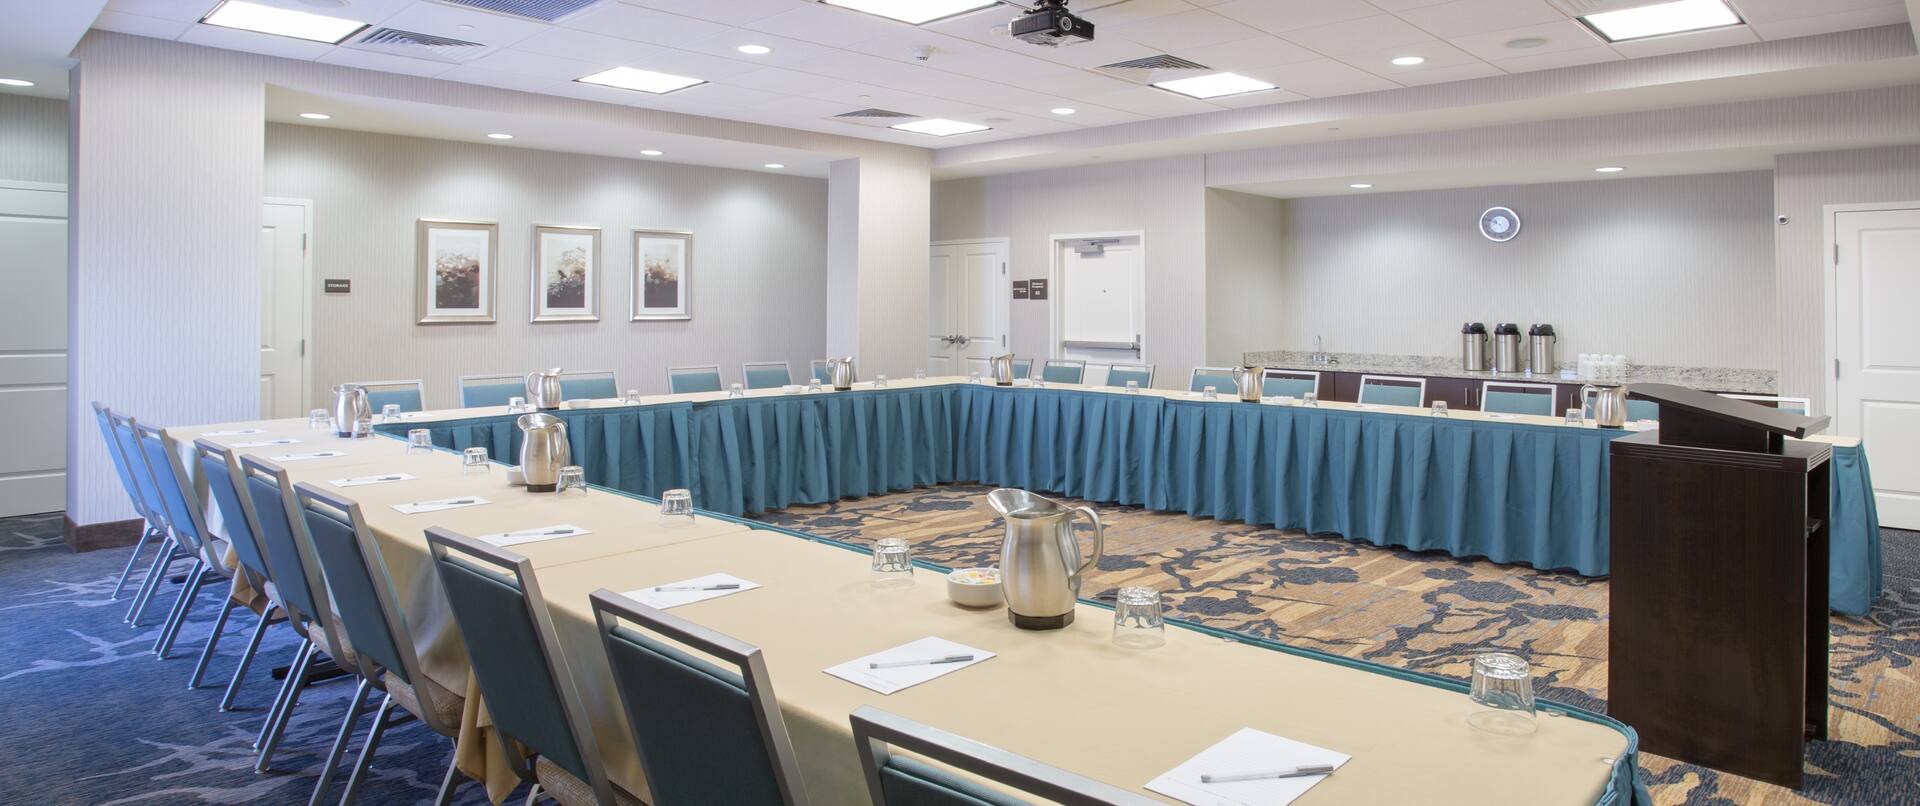 Meeting Room with Draped Tables  